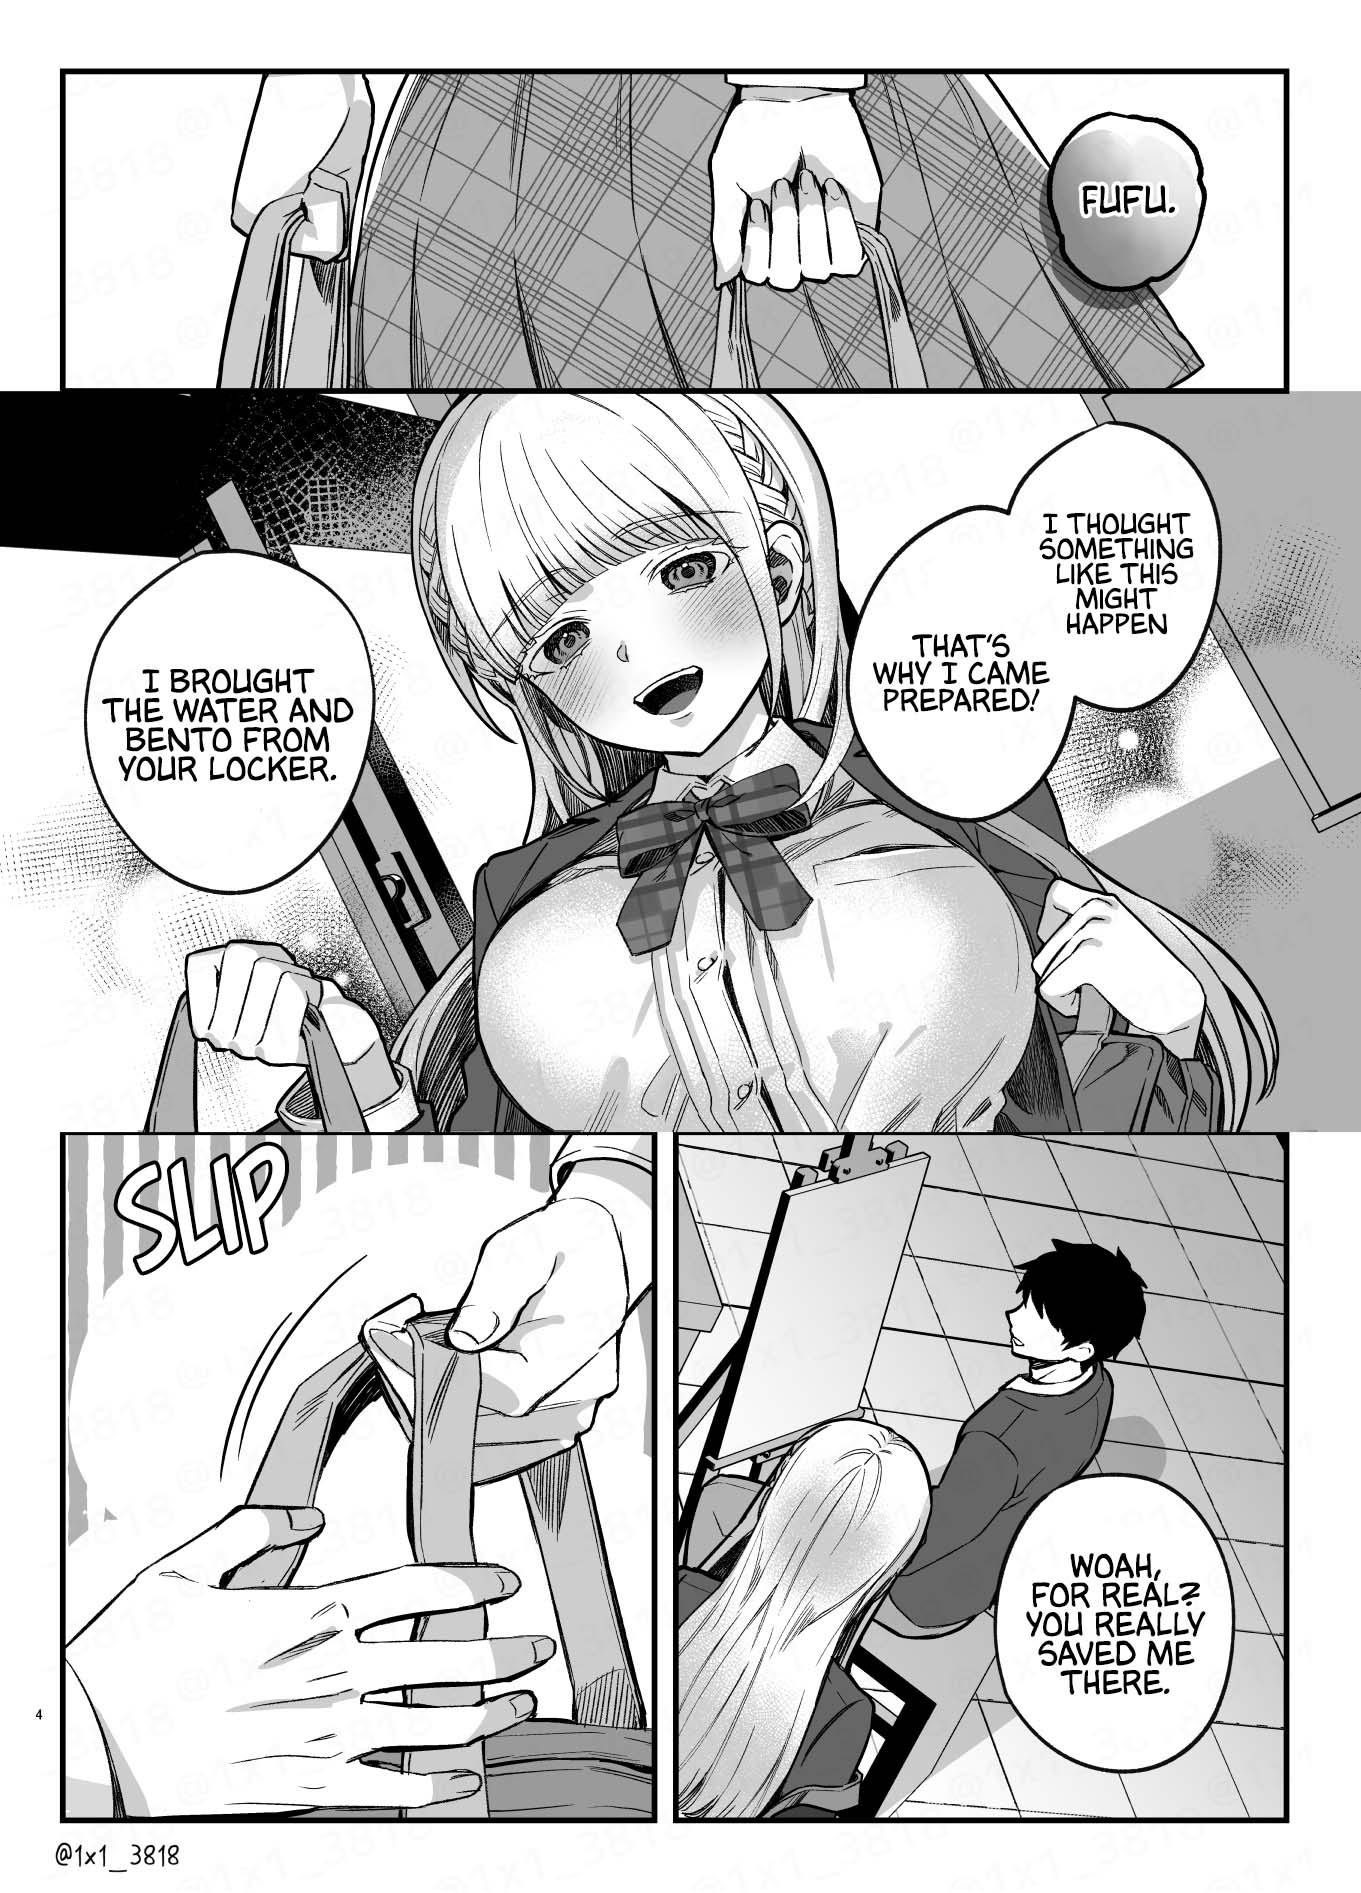 Yandere-Chan Is Scary - Page 2